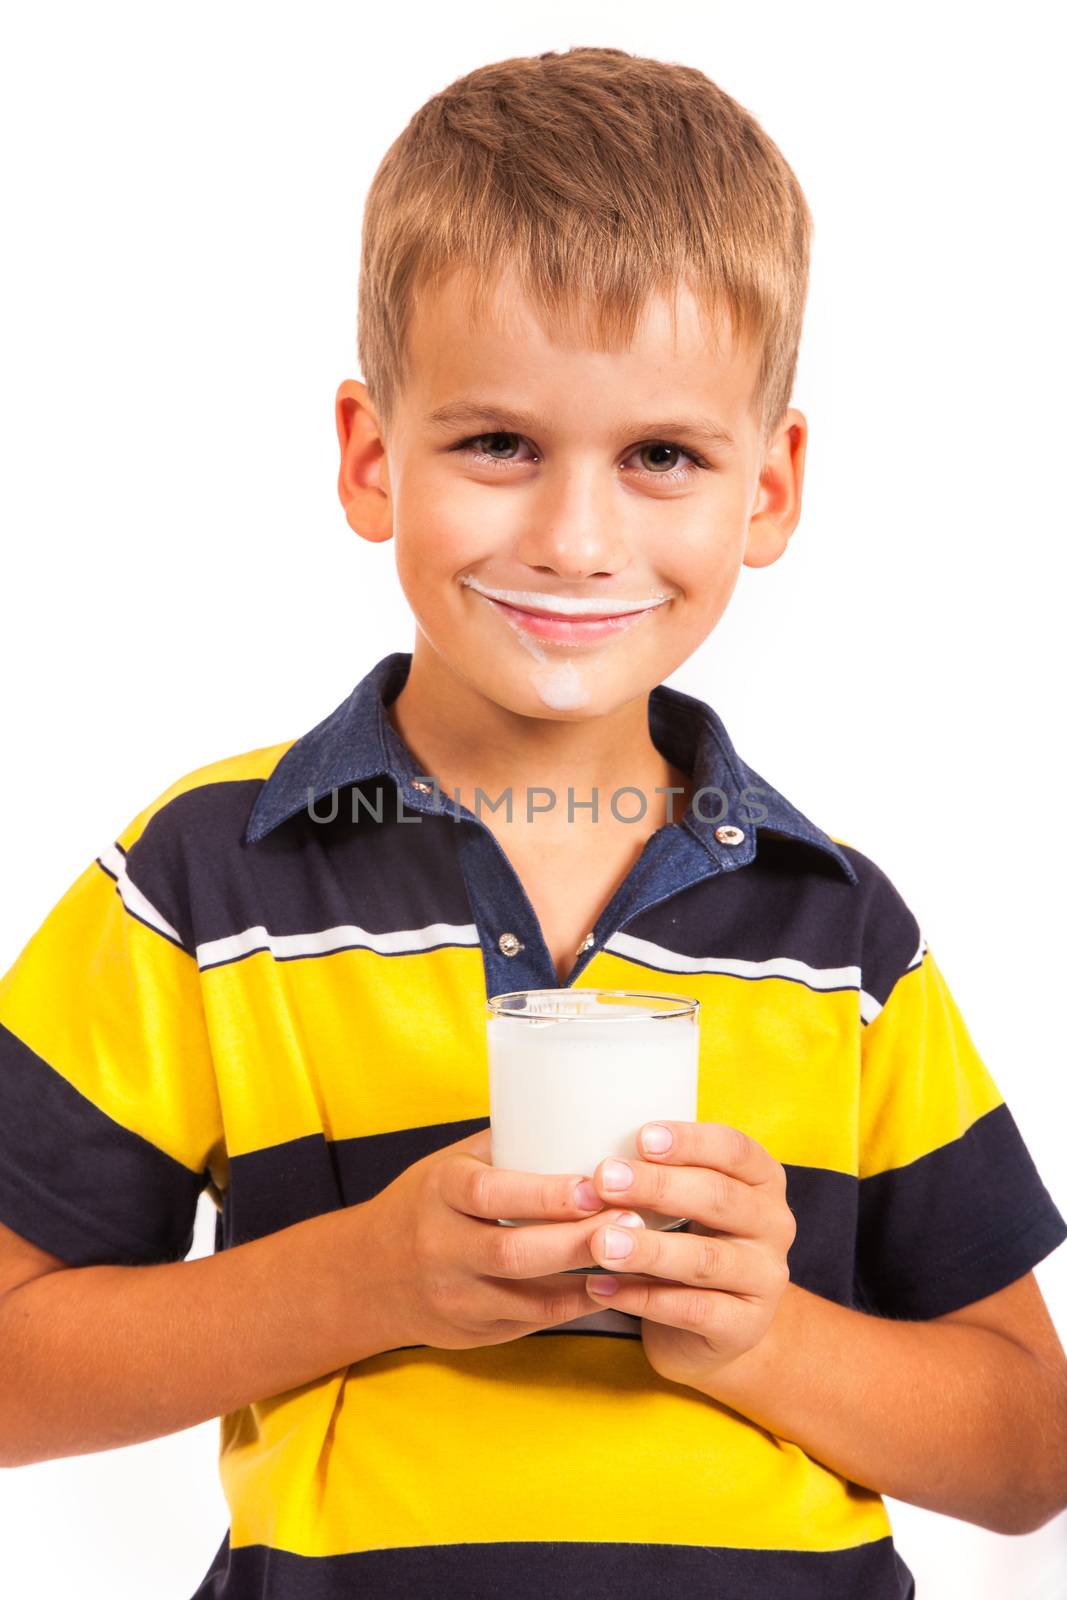 ��ute boy is drinking milk. Schoolboy is holding a cup of milk isolated on a white background